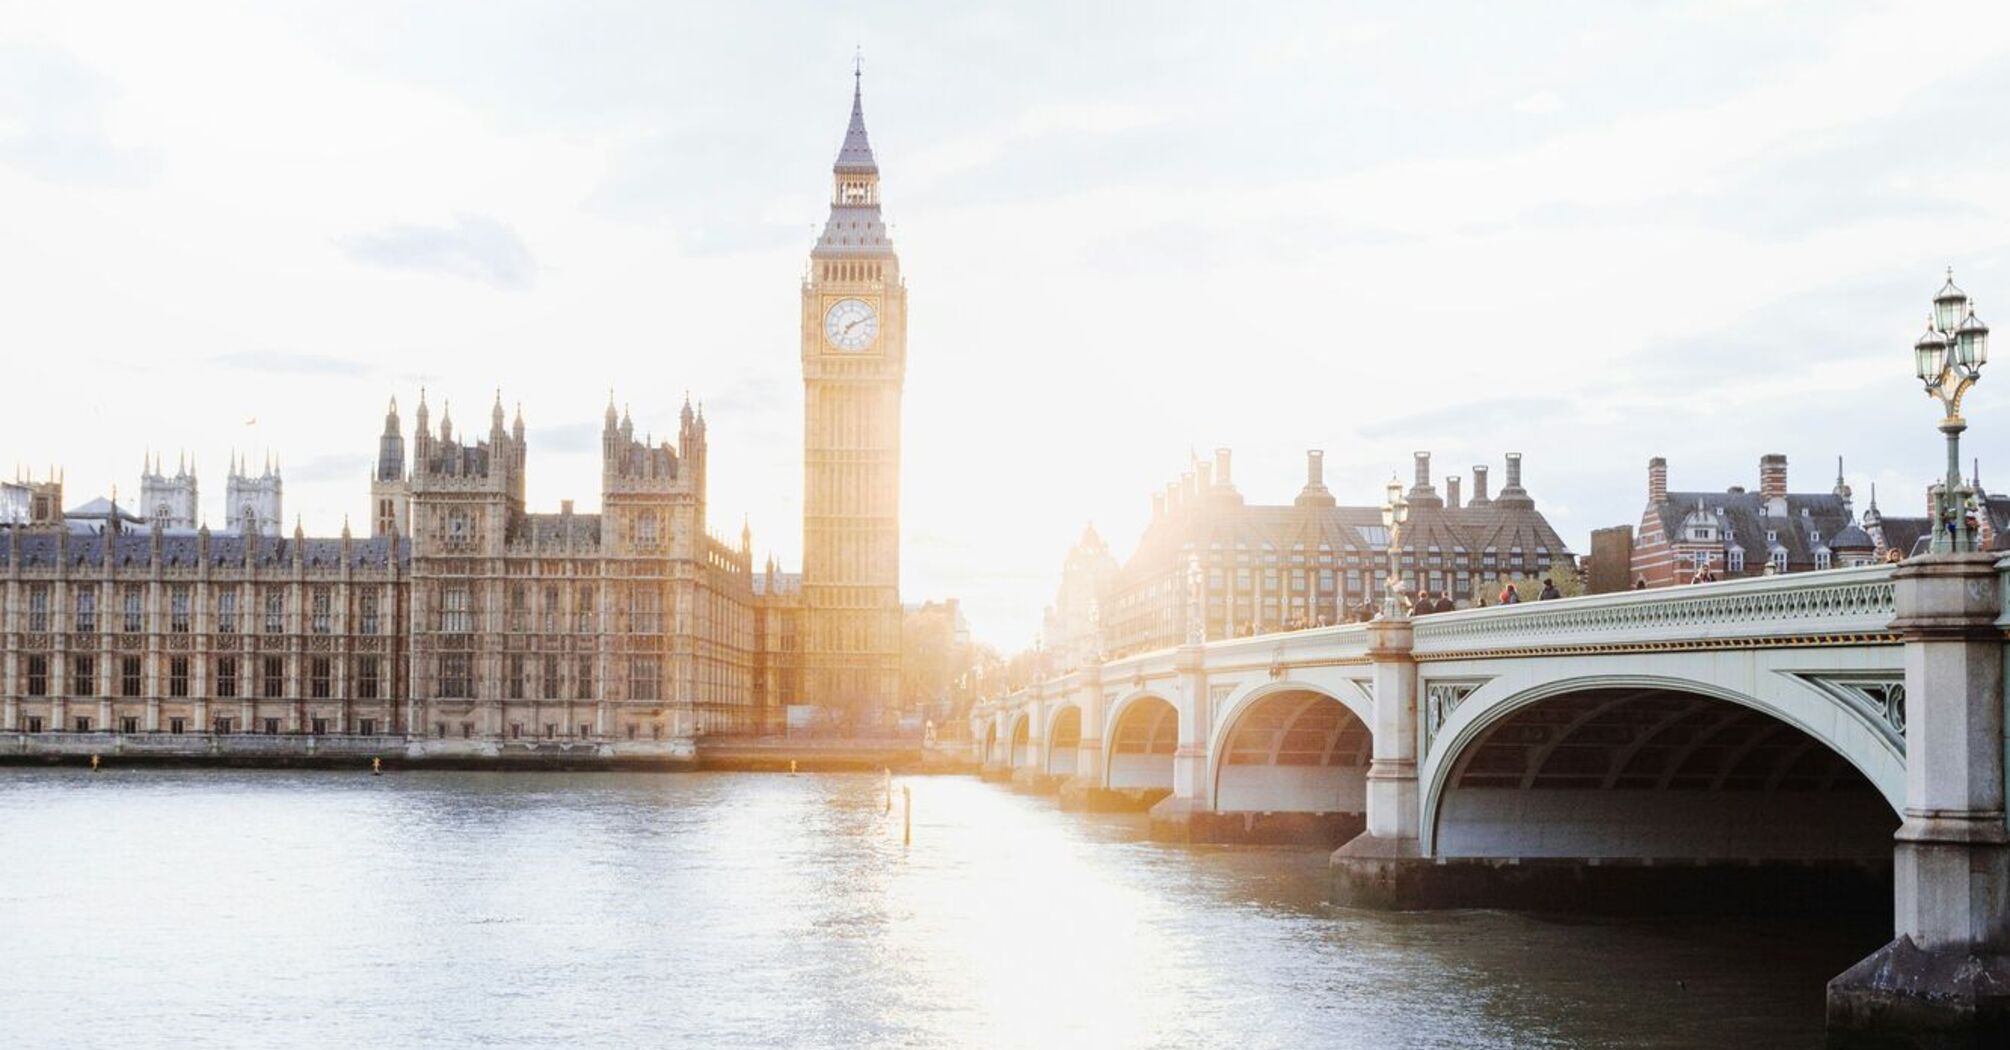 Sunlit view of the Big Ben and Westminster Bridge over the Thames River in London